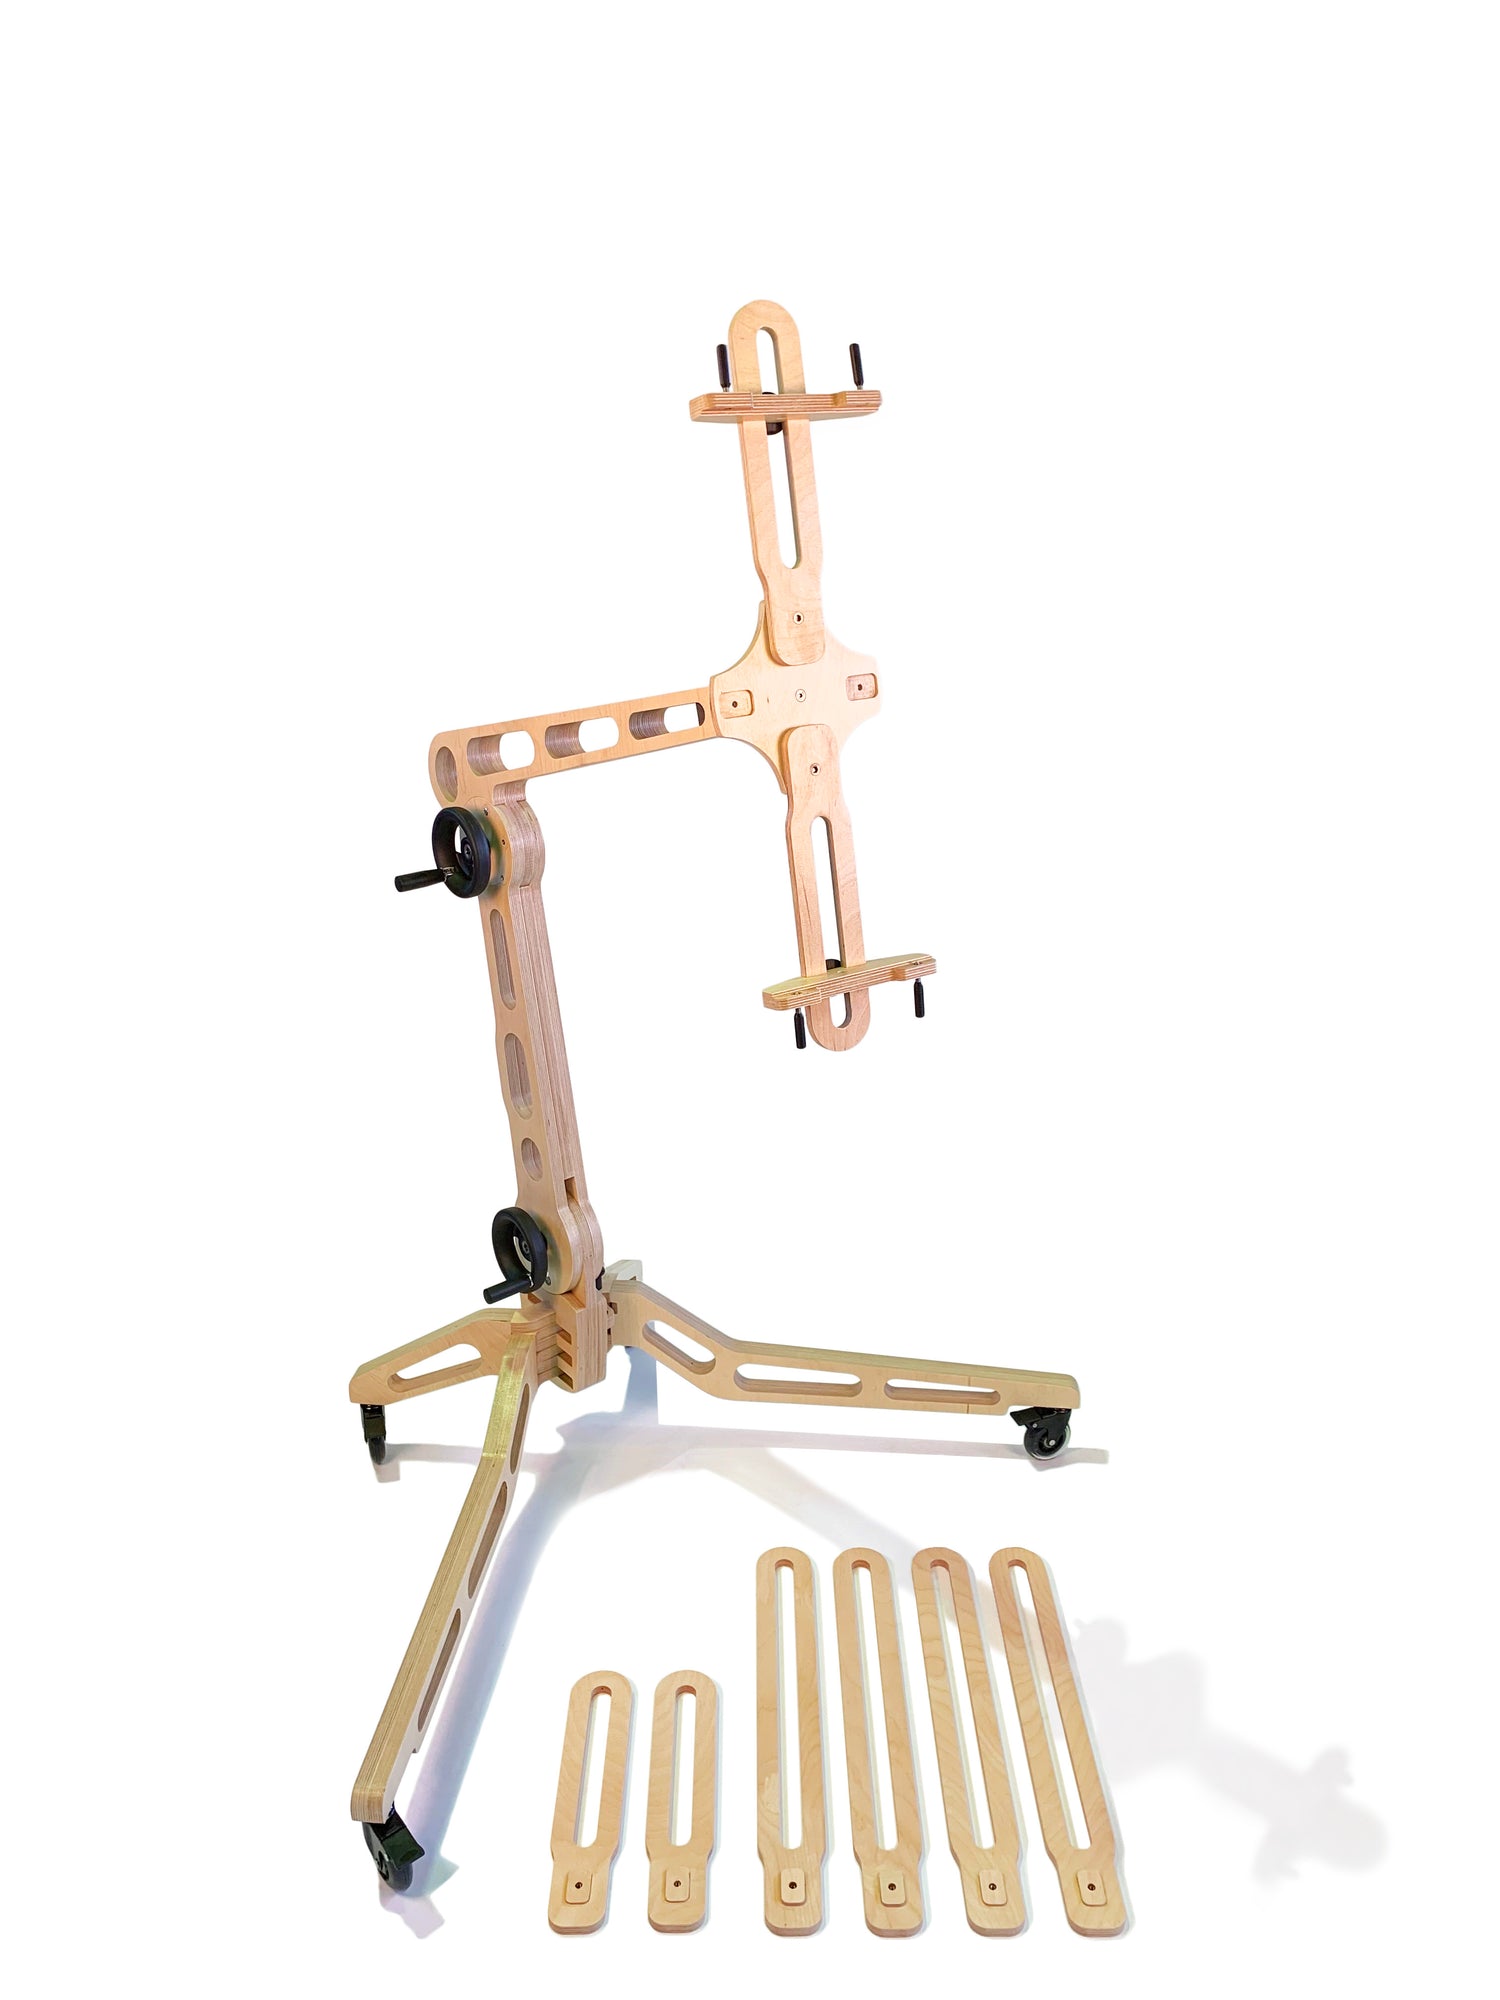 Freasel accessible easel front view with canvas holders shown 